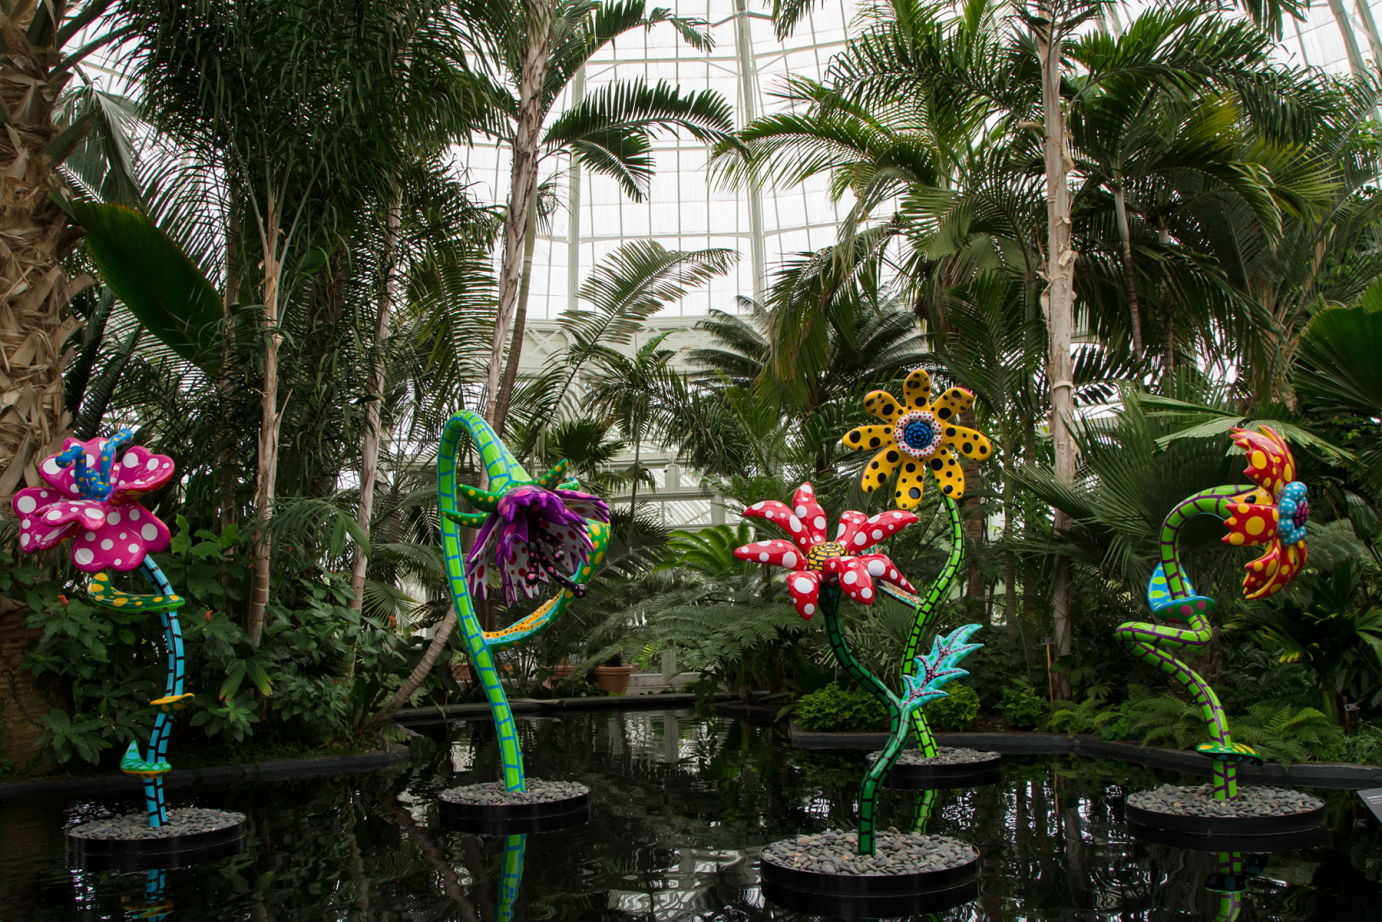 Yayoi Kasoma's colorful dotted flower sculptures stand in water in a greenhouse surrounded by palms. It's an exhibit at the New York Botanical Gardens.